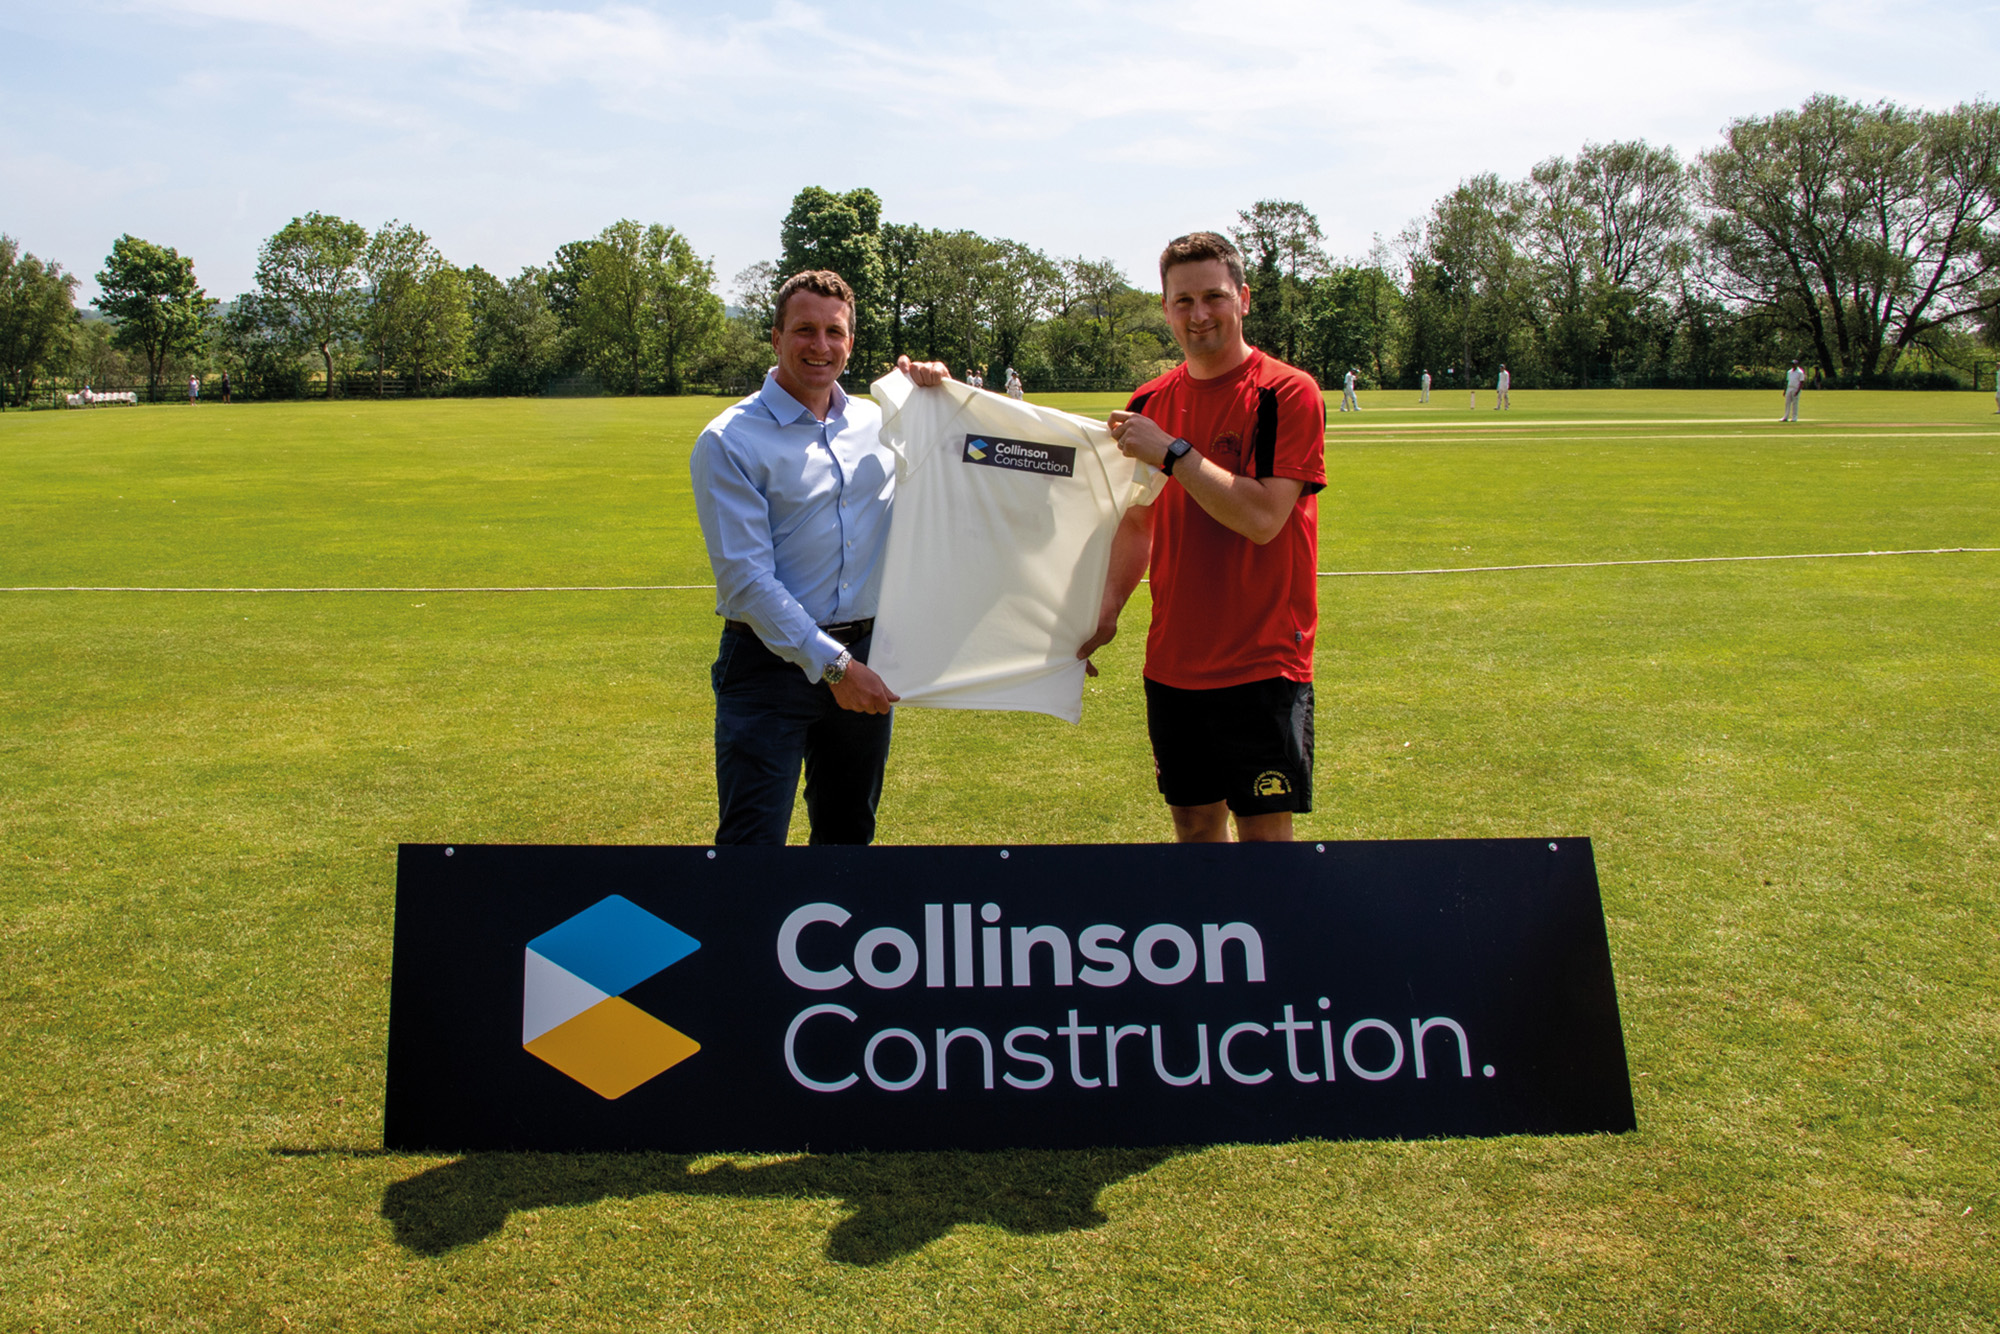 Garstang CC youngsters bowled over by construction firm’s support